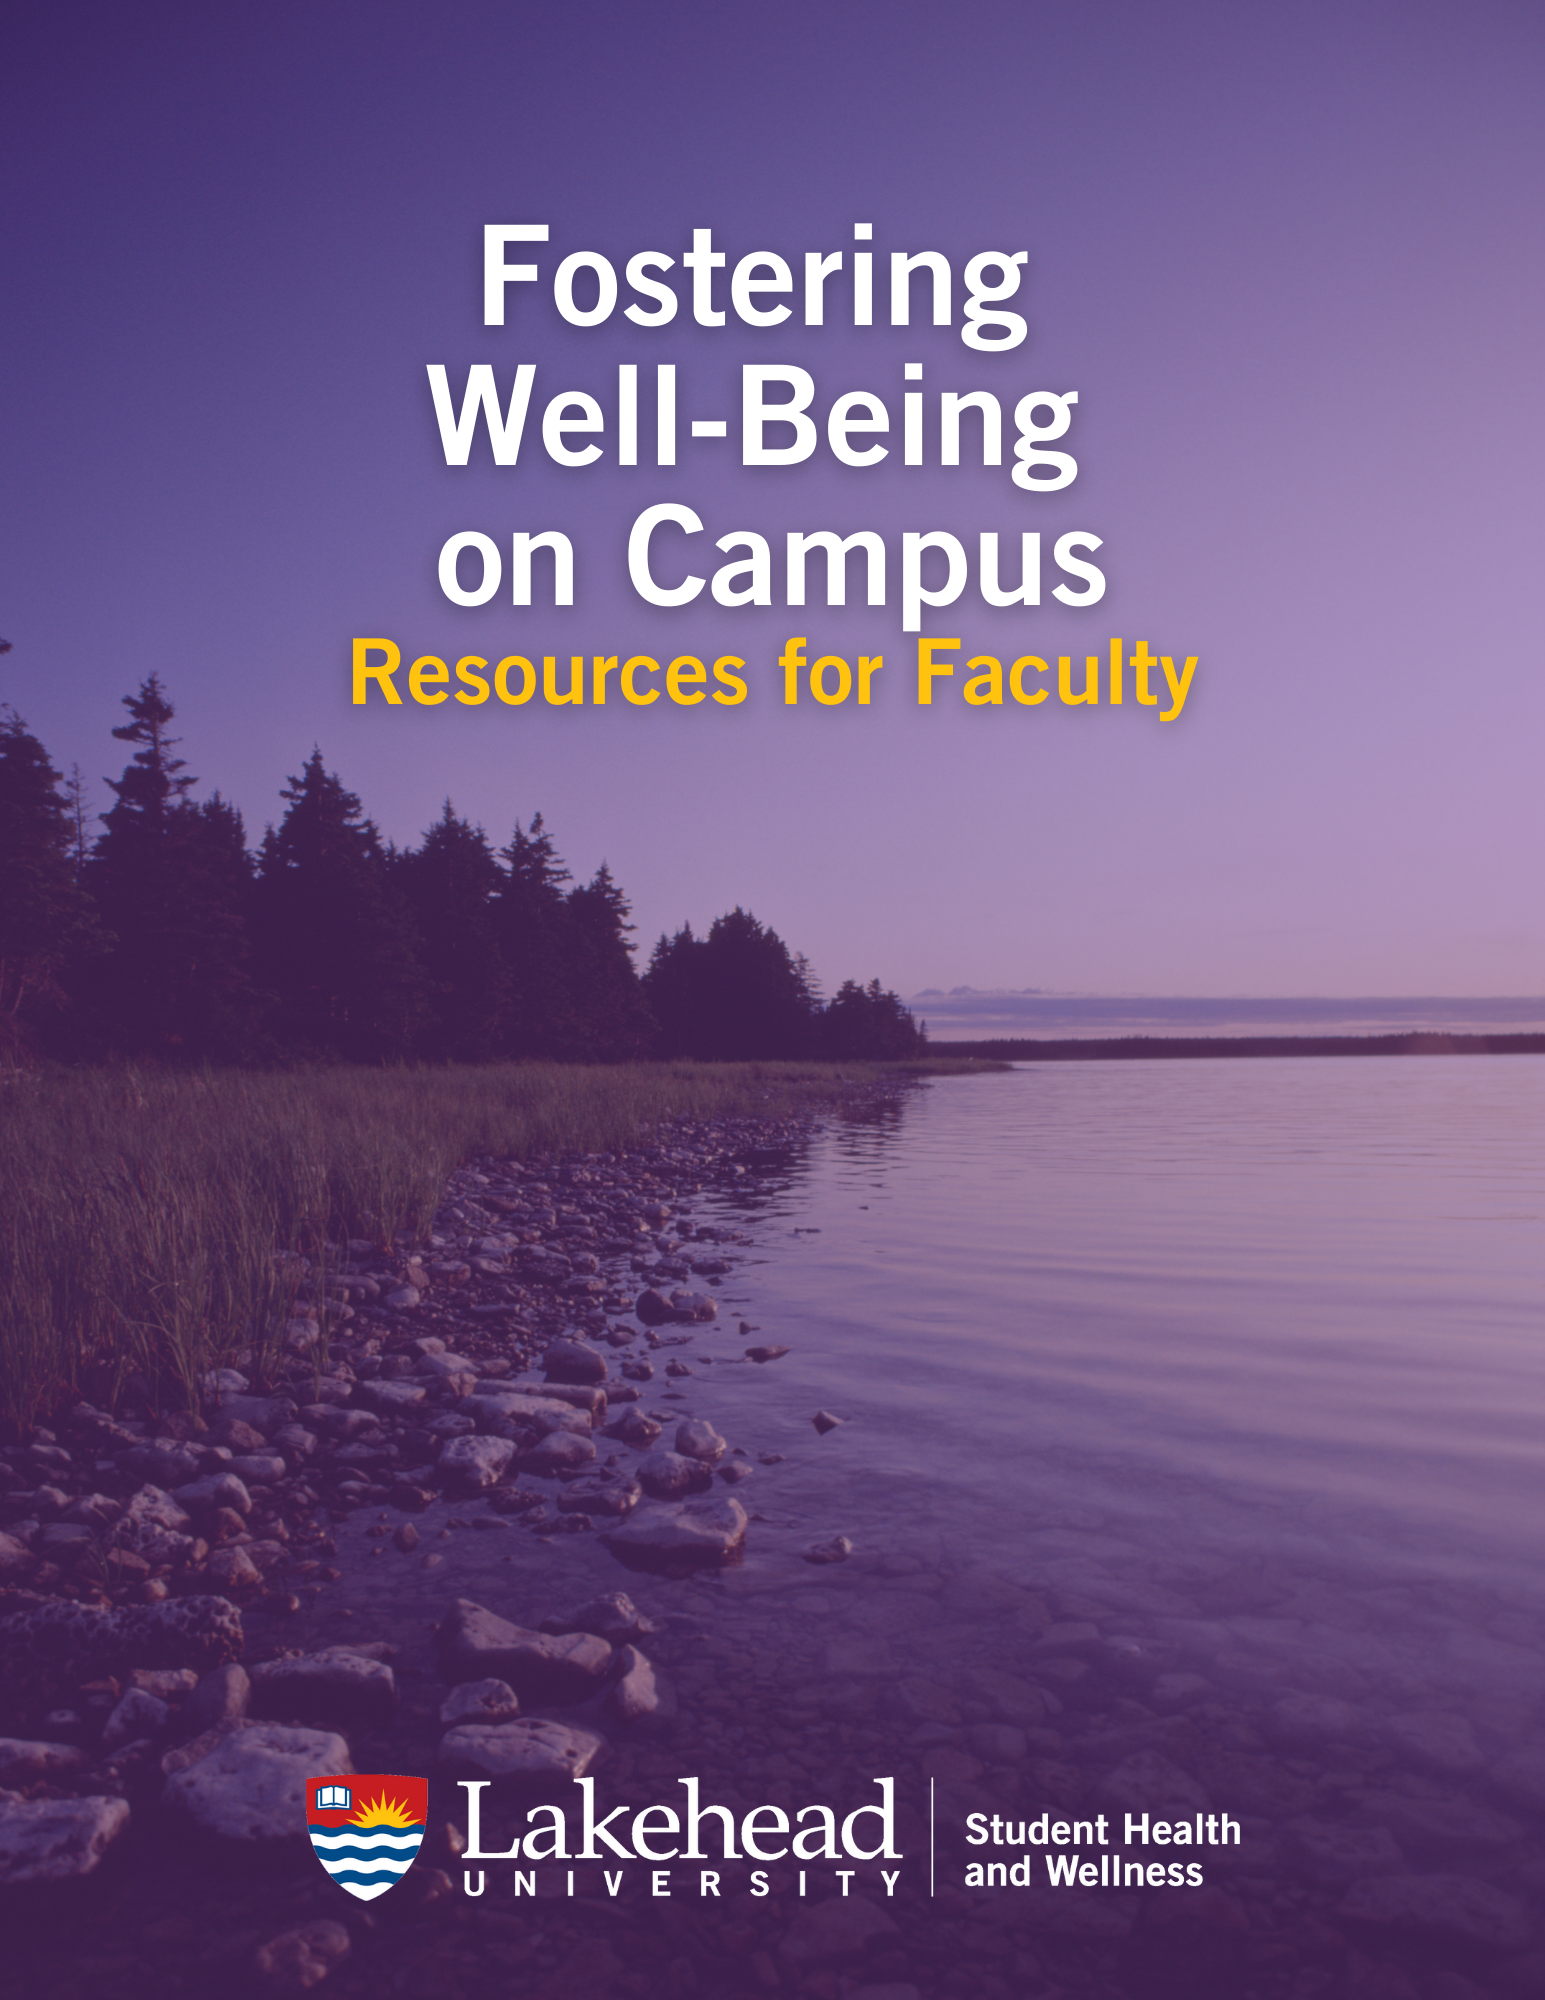 Fostering wellbeing on campus: Resources for Faculty